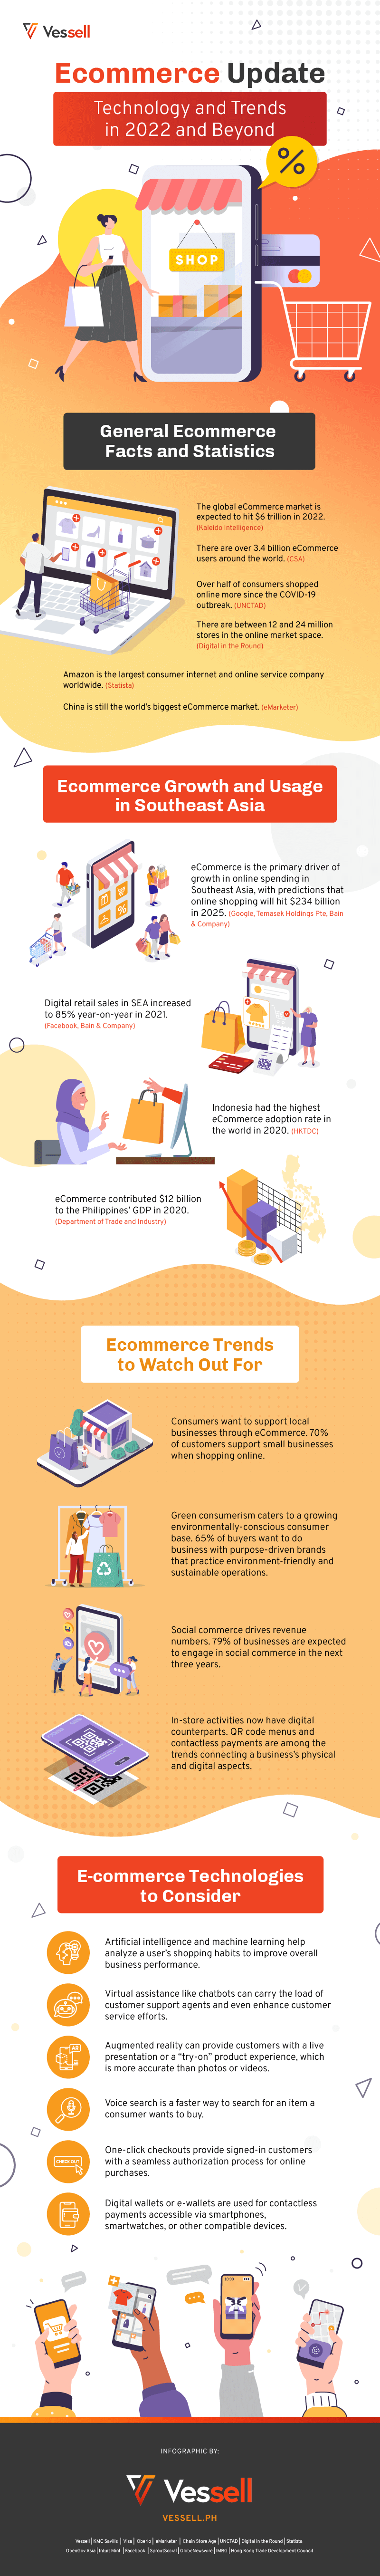 eCommerce sector, technology, and trends for 2022